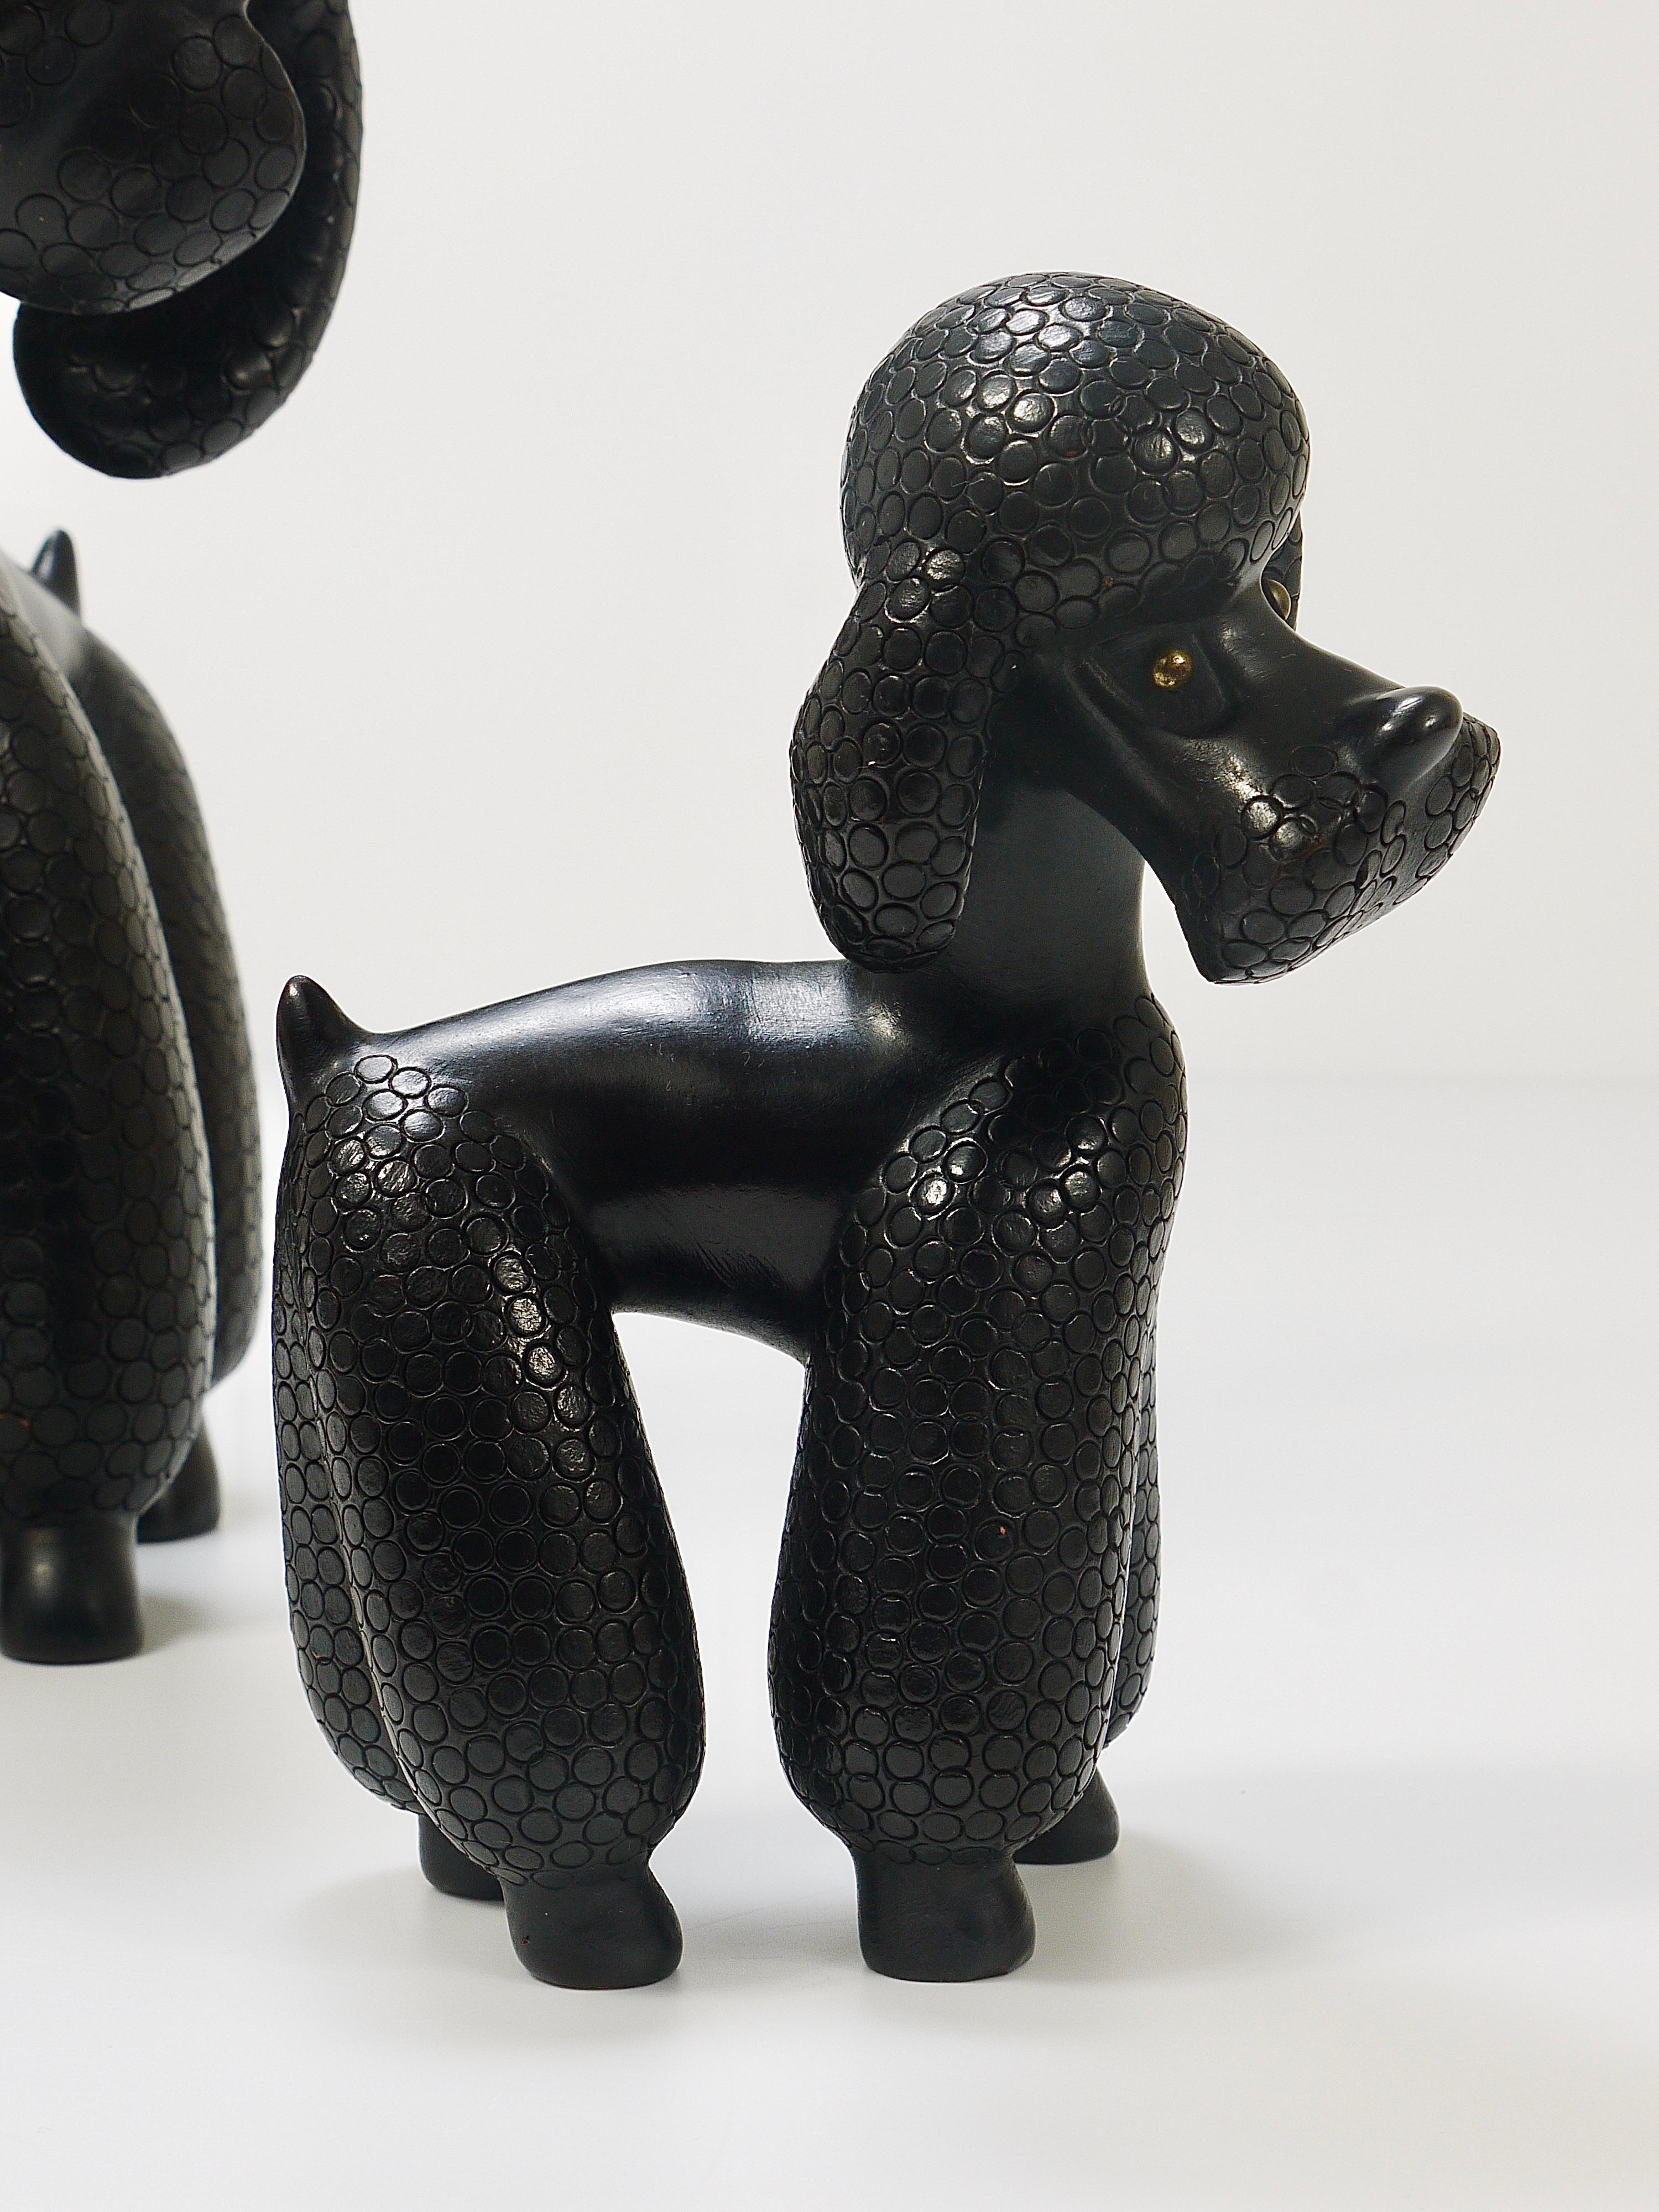 Pair of Mid-Century Dog Poodle Sculptures by Leopold Anzengruber, Austria, 1950s For Sale 9